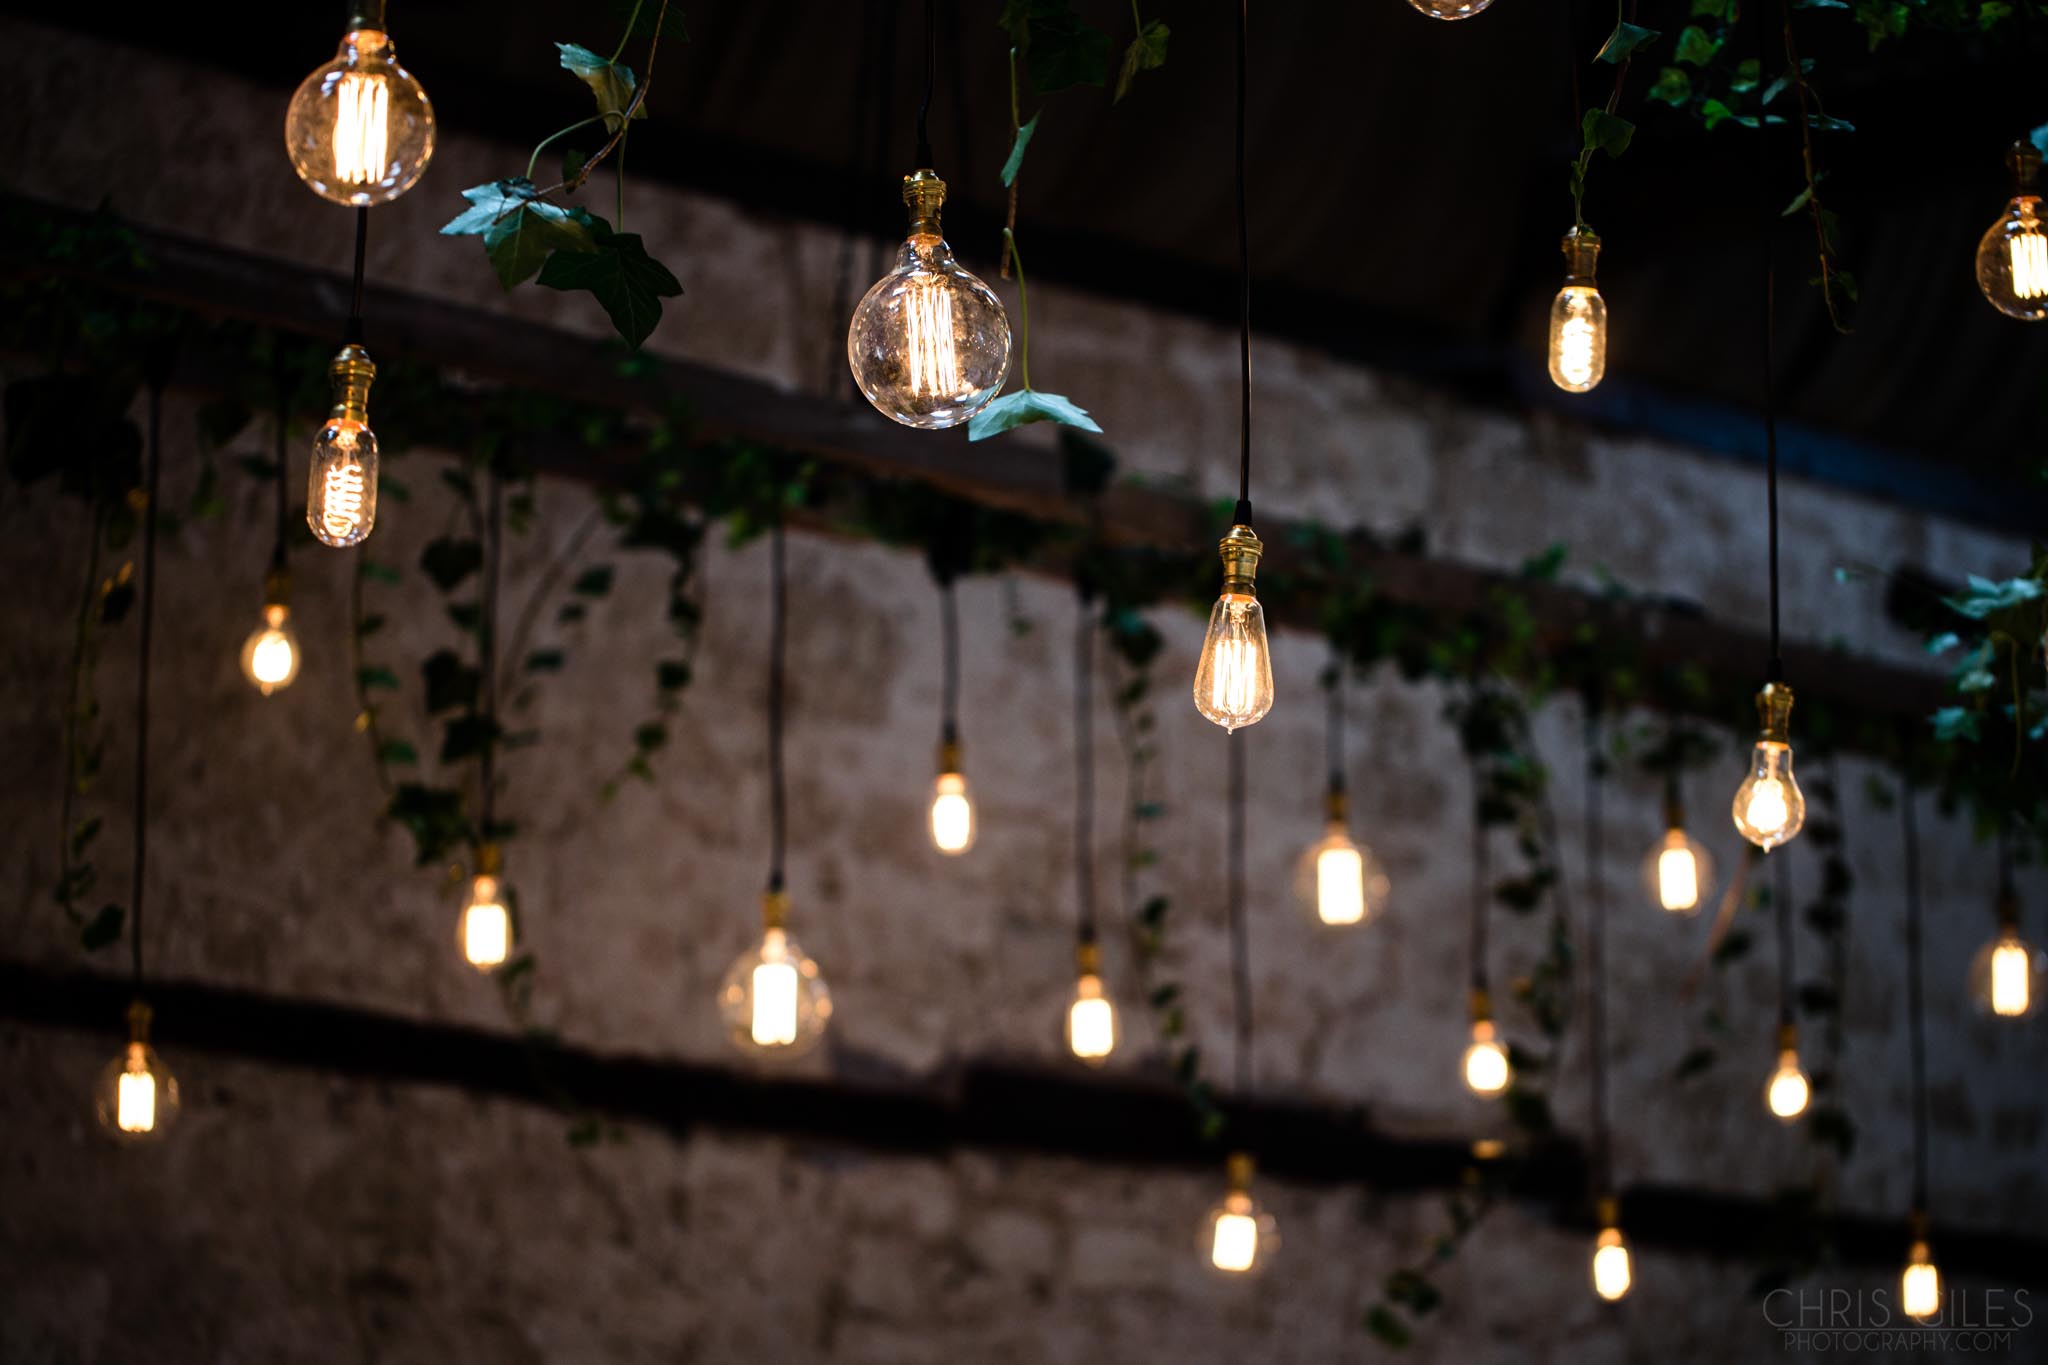 Old style retro Tungsten Light Bulbs as decoration